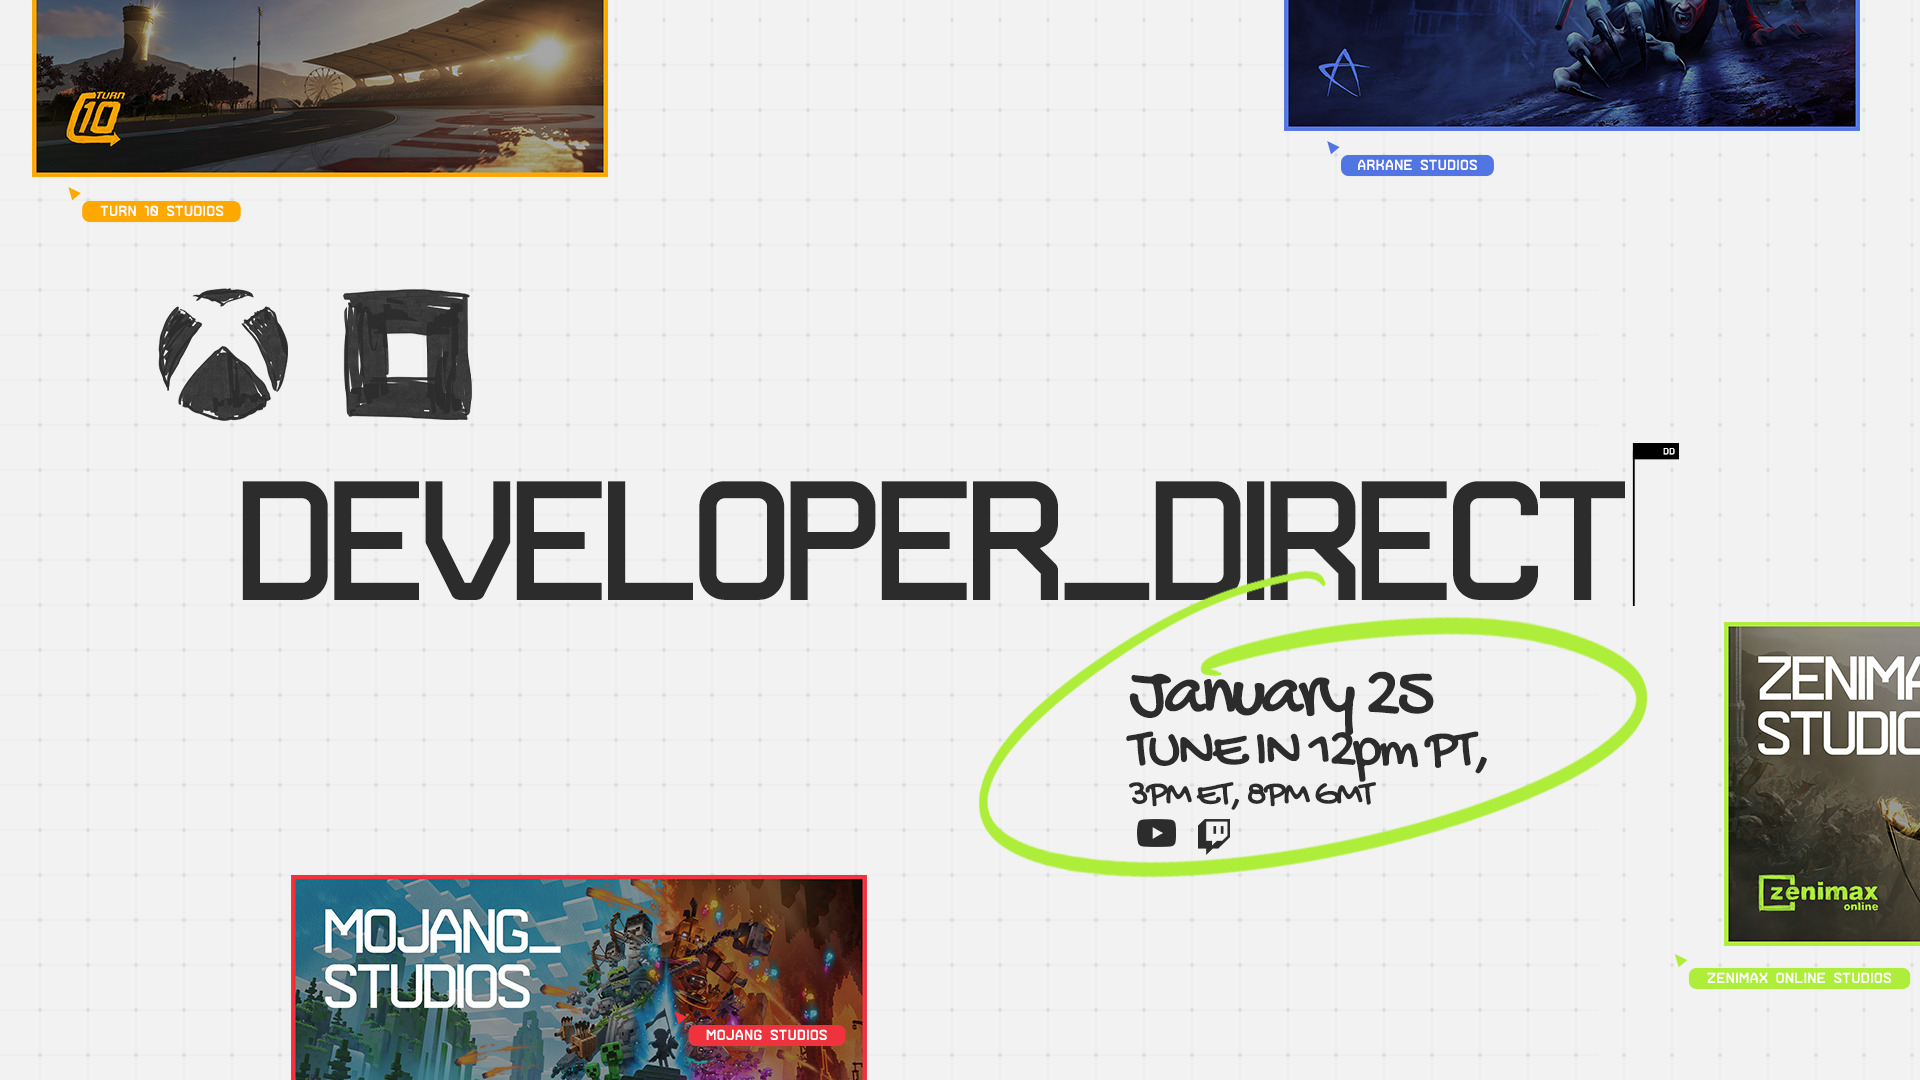 The Xbox Live and Bethesda Softworks Developer_Direct is set for January 25th